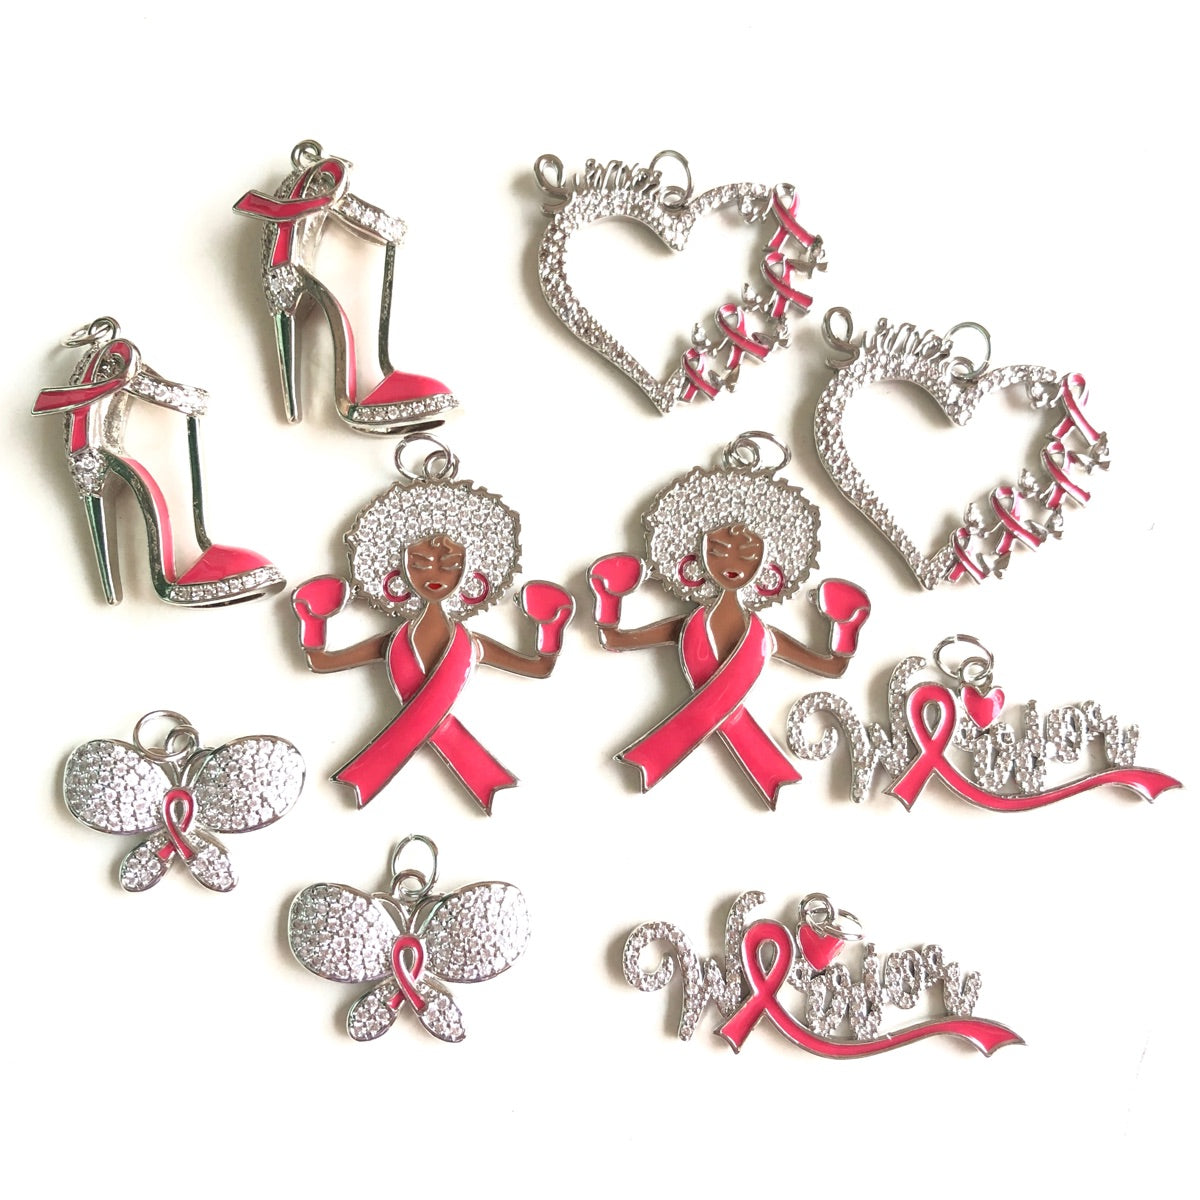 10pcs/lot Pink Ribbon Black Girl Warrior Survivor Heart High Heel Butterfly Breast Cancer Awareness Charms Bundle Silver Set CZ Paved Charms Breast Cancer Awareness Mix Charms New Charms Arrivals Charms Beads Beyond